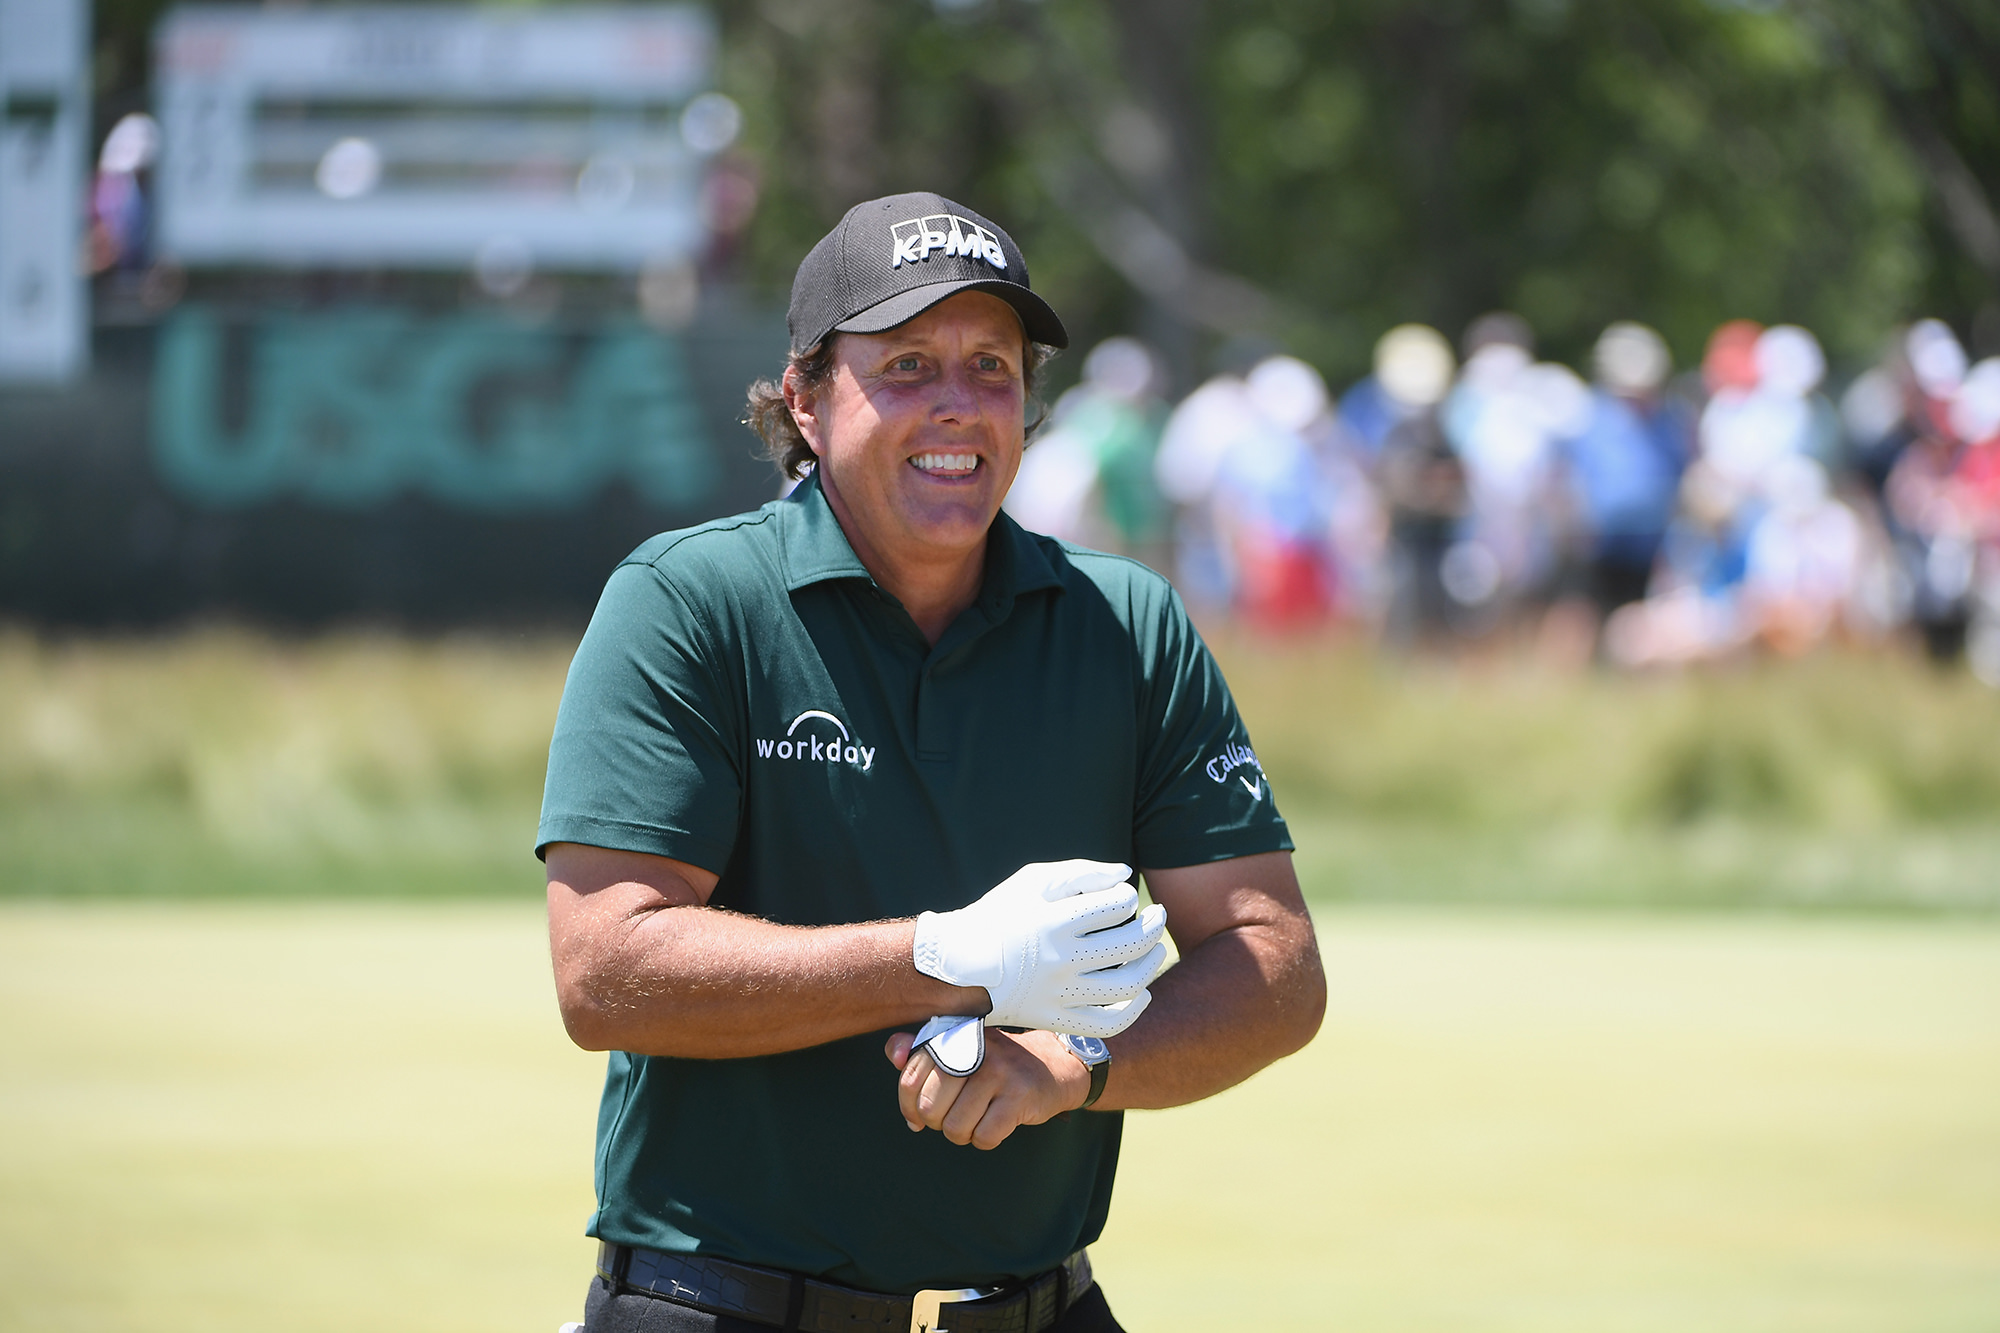 Everyone still loves Phil – but golf is the only loser after Mickelson's meltdown